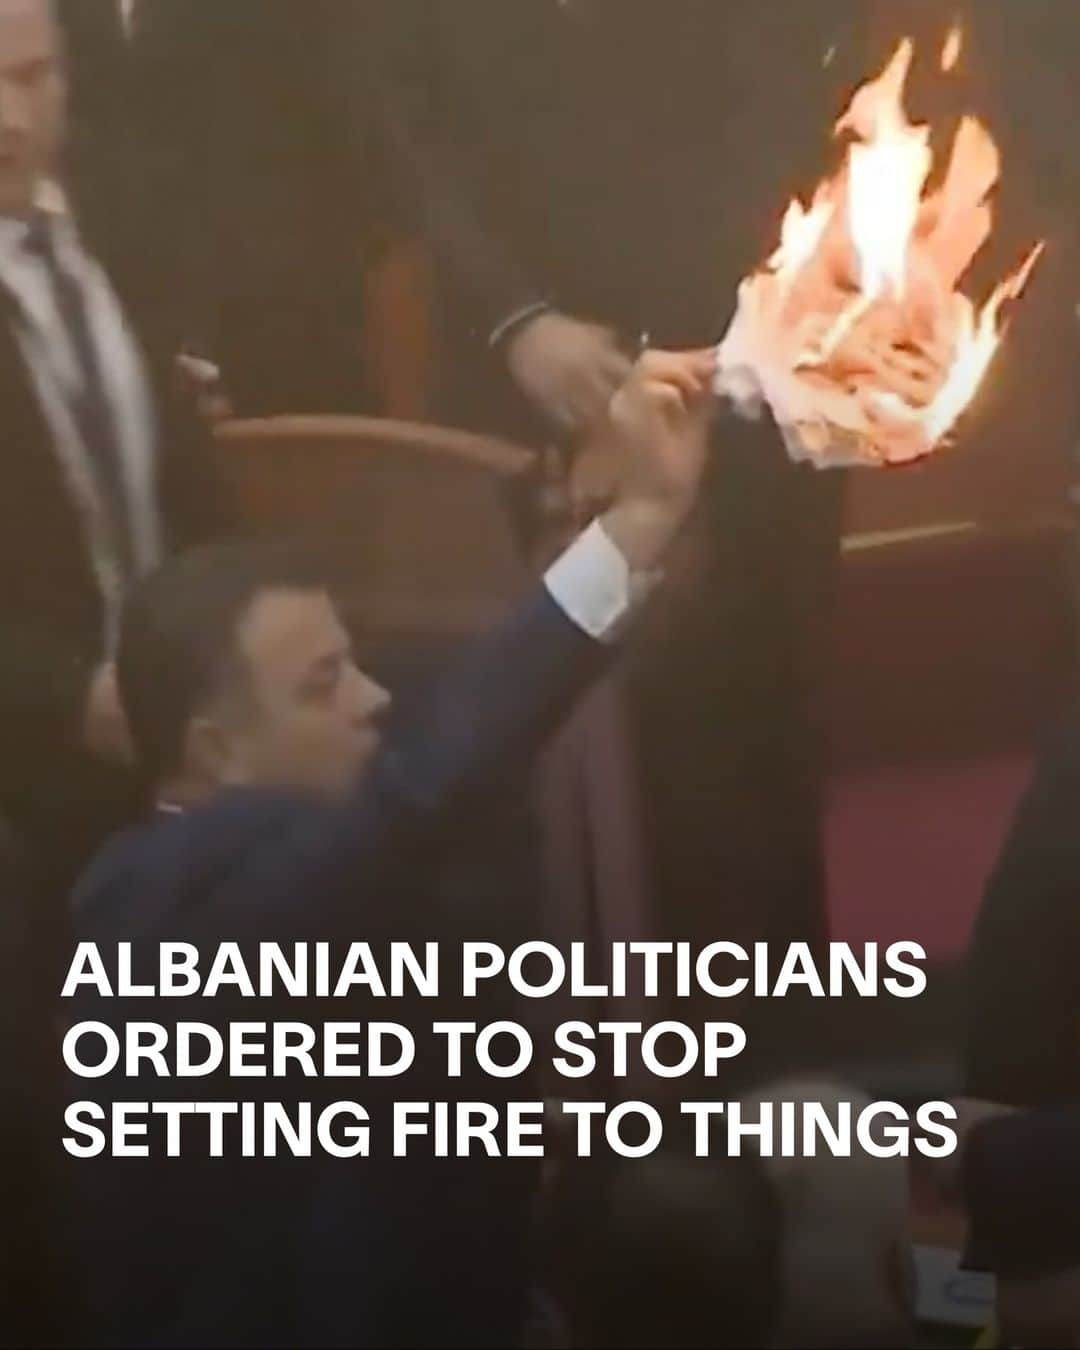 VICEのインスタグラム：「One effective way to sabotage a political debate is to start a fire in the middle of a government building. ⁠ ⁠ Politicians in Albania have clearly cottoned onto this, having spent the past couple of weeks lighting fires and smoke bombs in the country’s parliament, in order to disrupt a string of key debates. ⁠ ⁠ On the 20th of November, Sali Berisha – a former prime minister, and leader of the opposition party – protested his indictment for corruption by starting a small fire in a trash can. His allies then sparked smoke bombs to disrupt a debate about Albania’s 2024 government budget. On Monday, opposition politicians threw lit cigarettes and started another fire in a trash can, in support of Berisha. Those same politicians have now been threatened with legal action for their fire-starting. ⁠ ⁠ All this political pyromania stems from a long-standing battle between the ruling Socialist Party and its bitter rivals in the Democratic Party. Keep reading at the link in bio.」